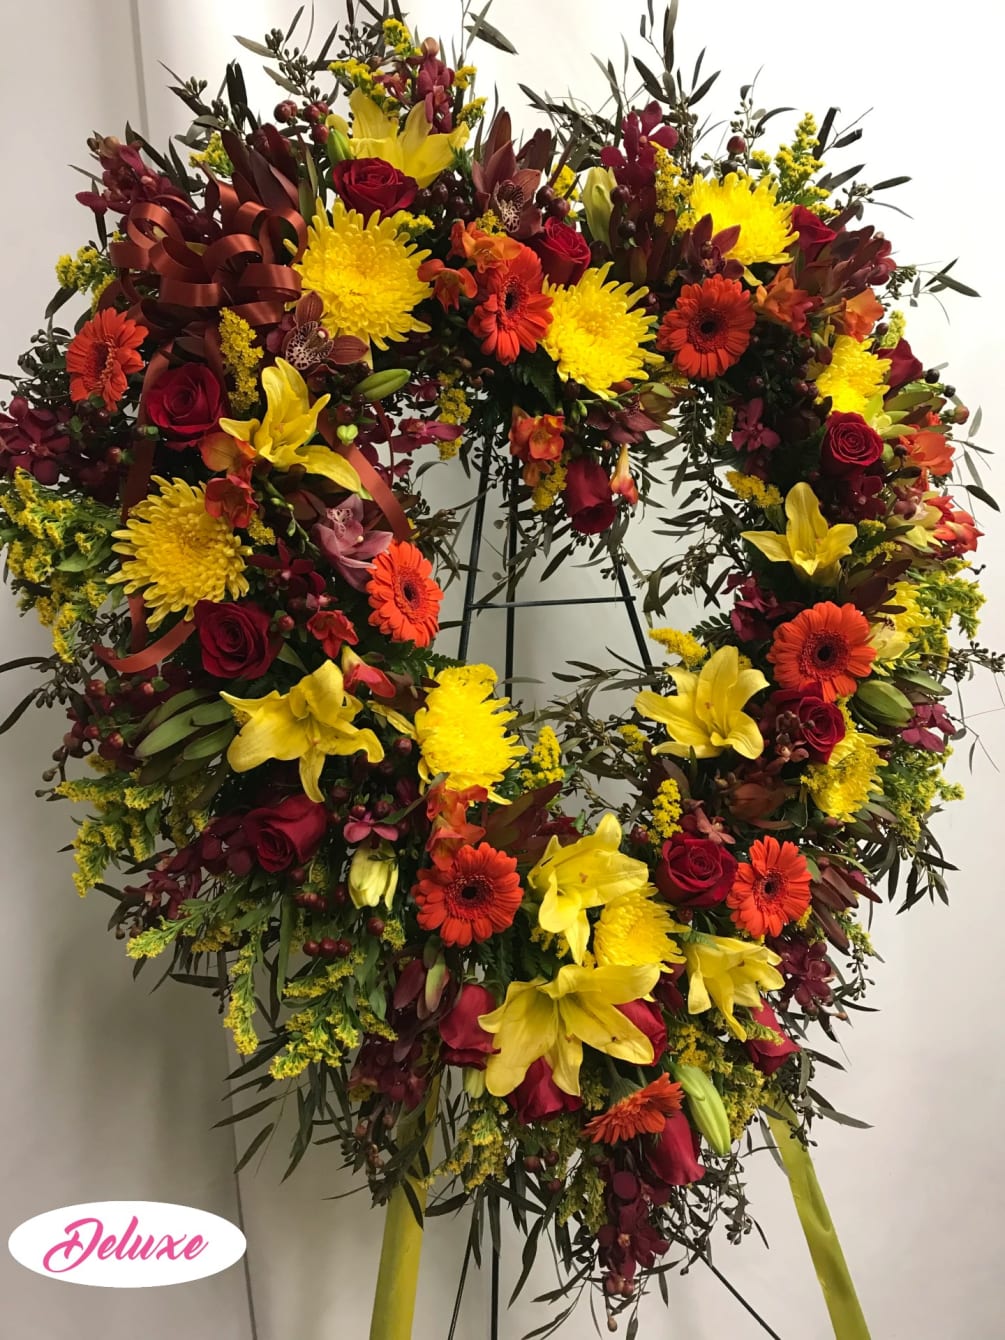 This open heart arrangement is a lovely assortment of autumn colored flowers.